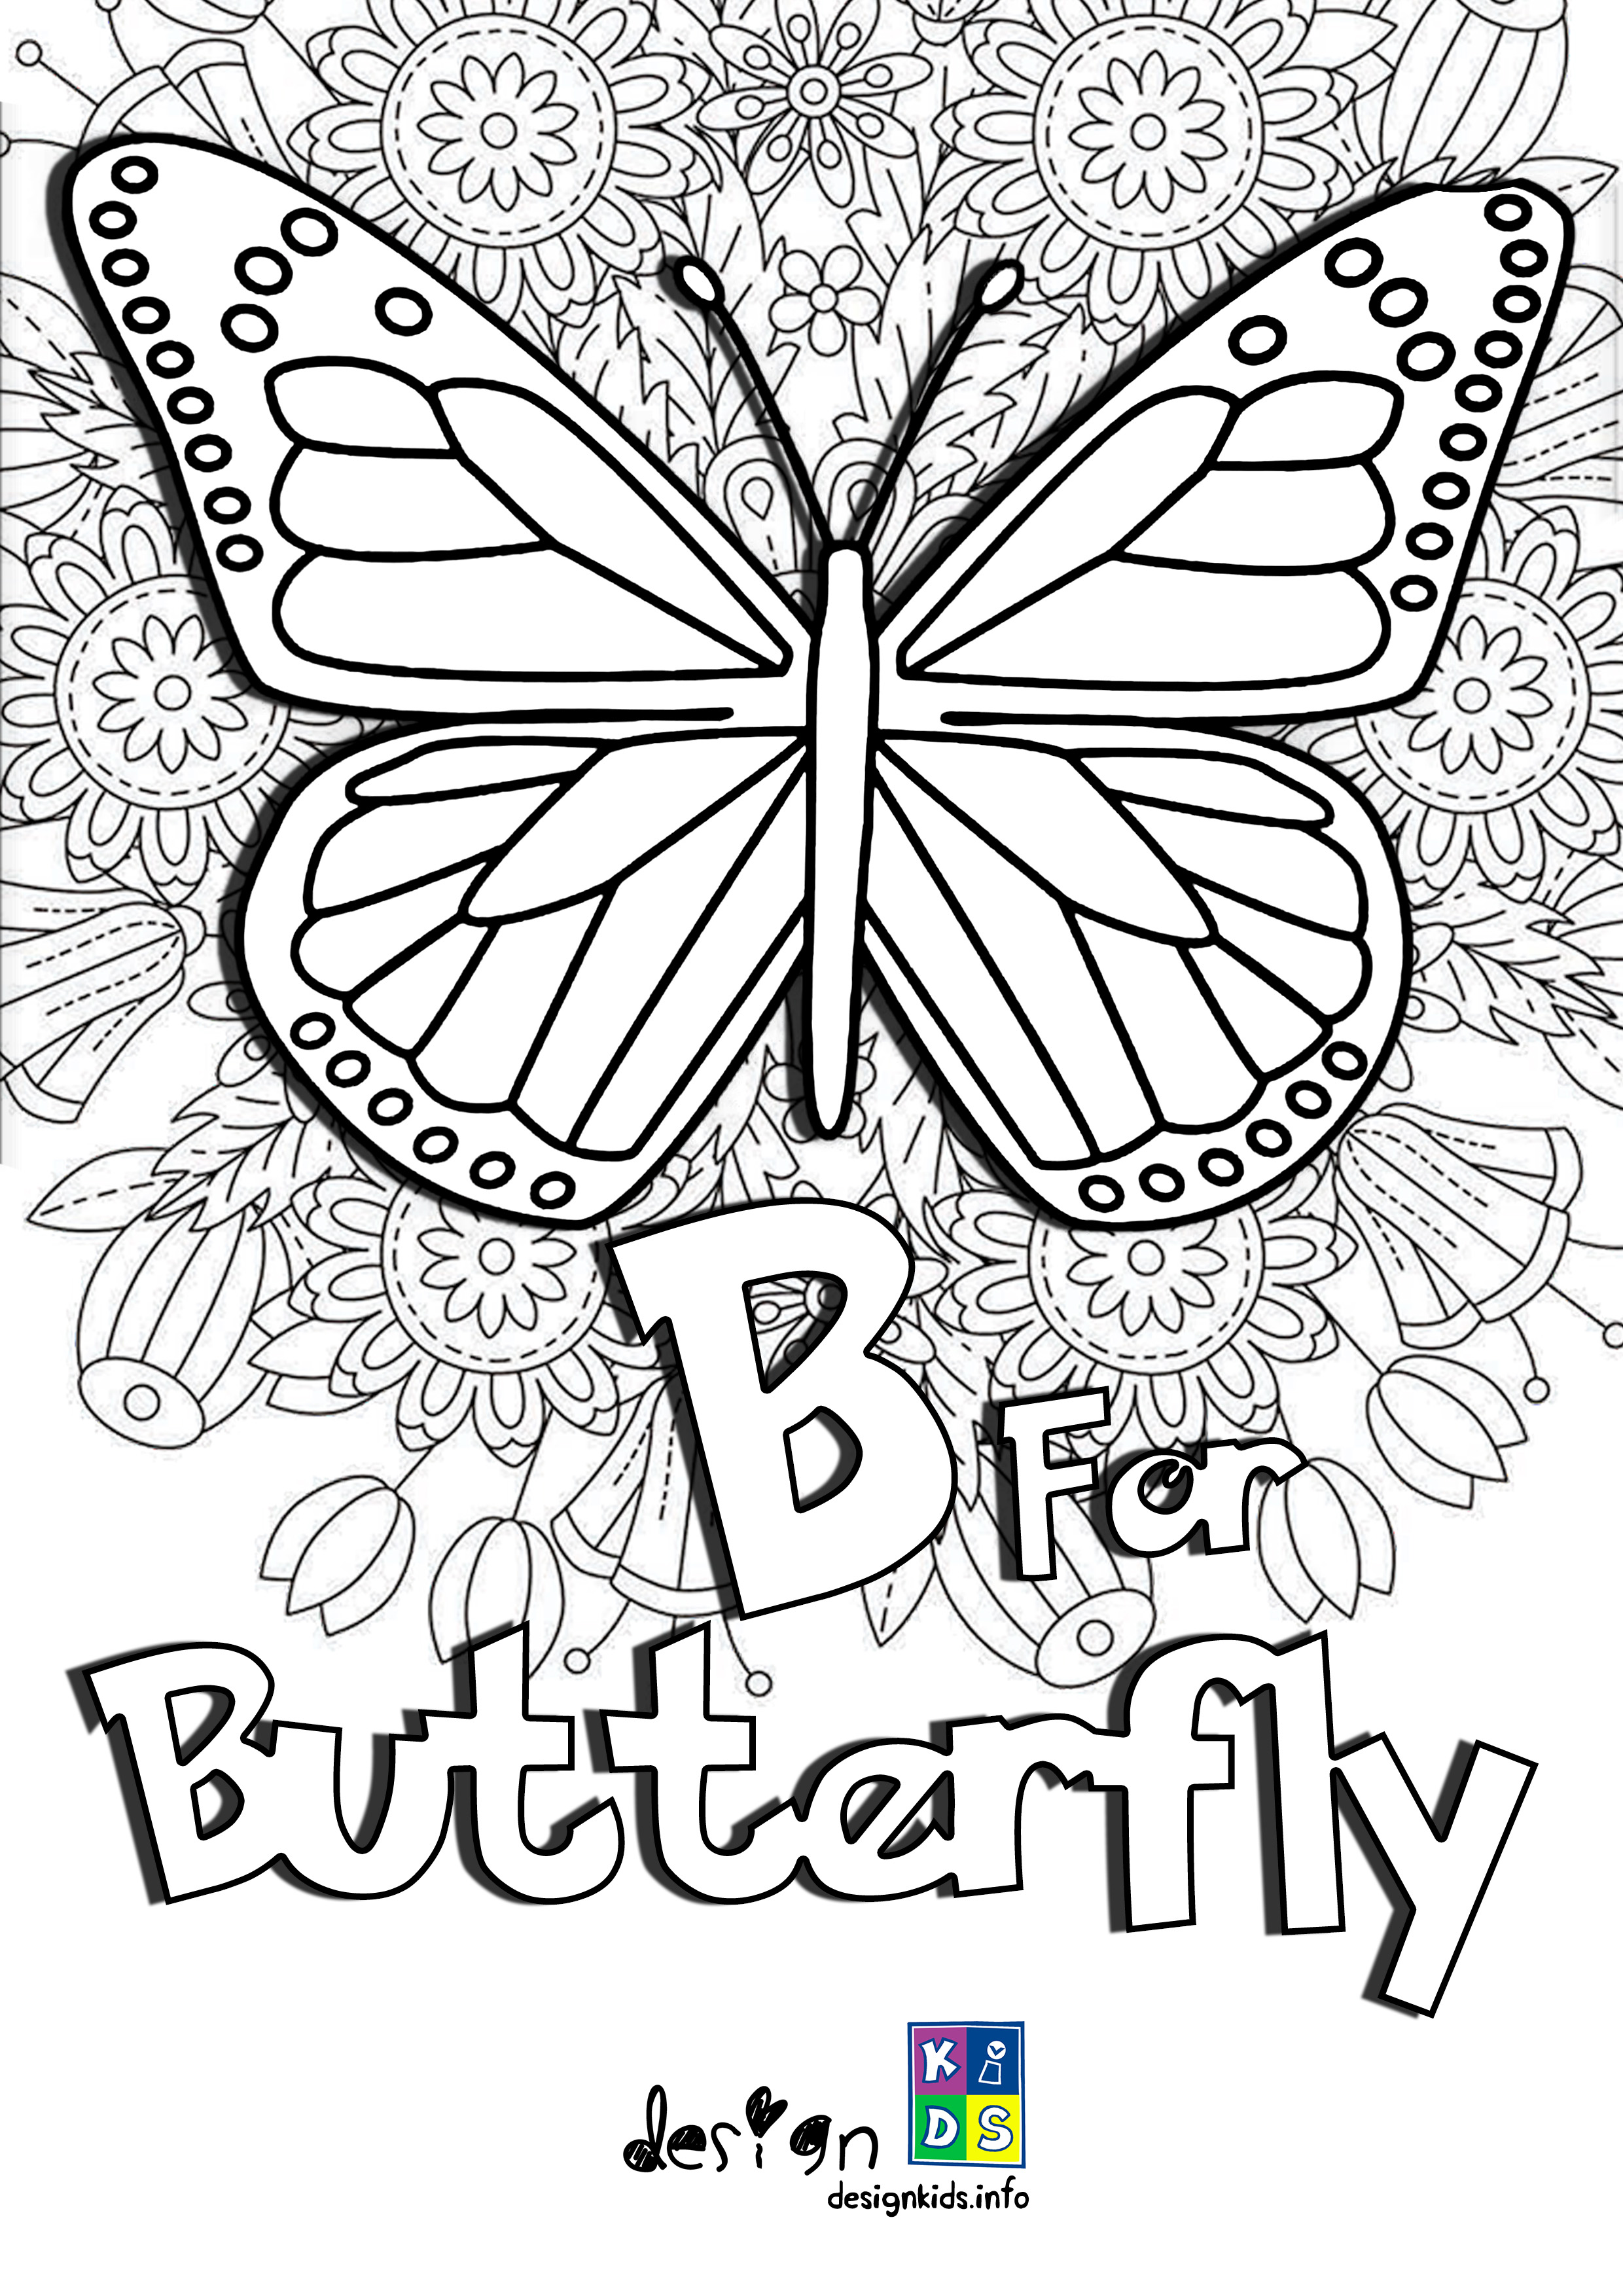 B For Butterfly Alphabet Coloring Wallpaper - Coloring Pages Of Butterflies - HD Wallpaper 